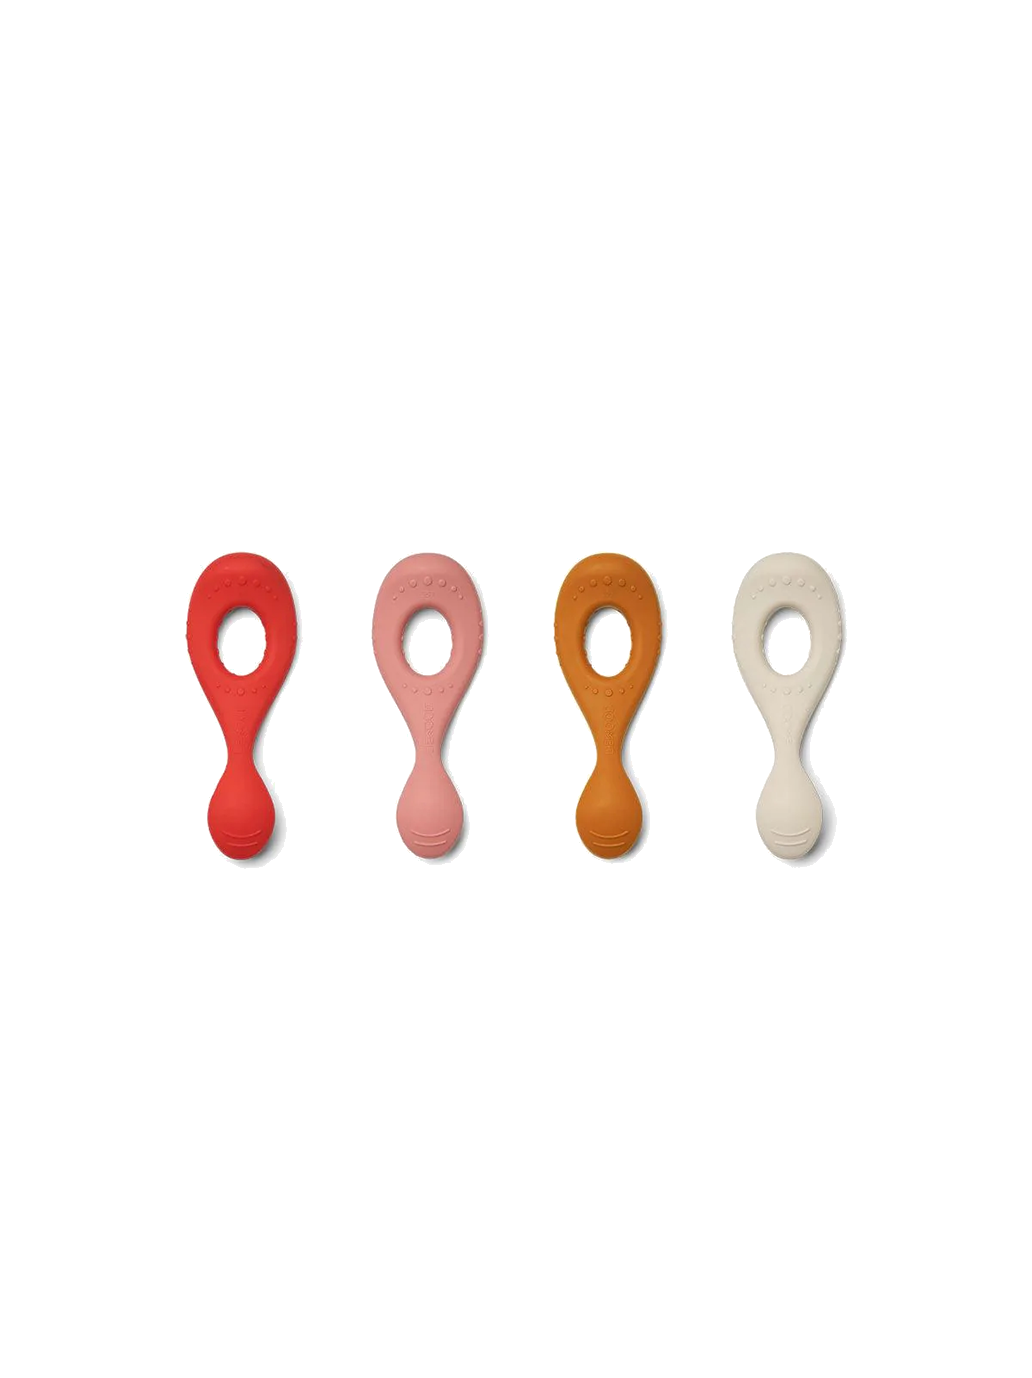 4-pack of silicone spoons for expanding the Liva diet